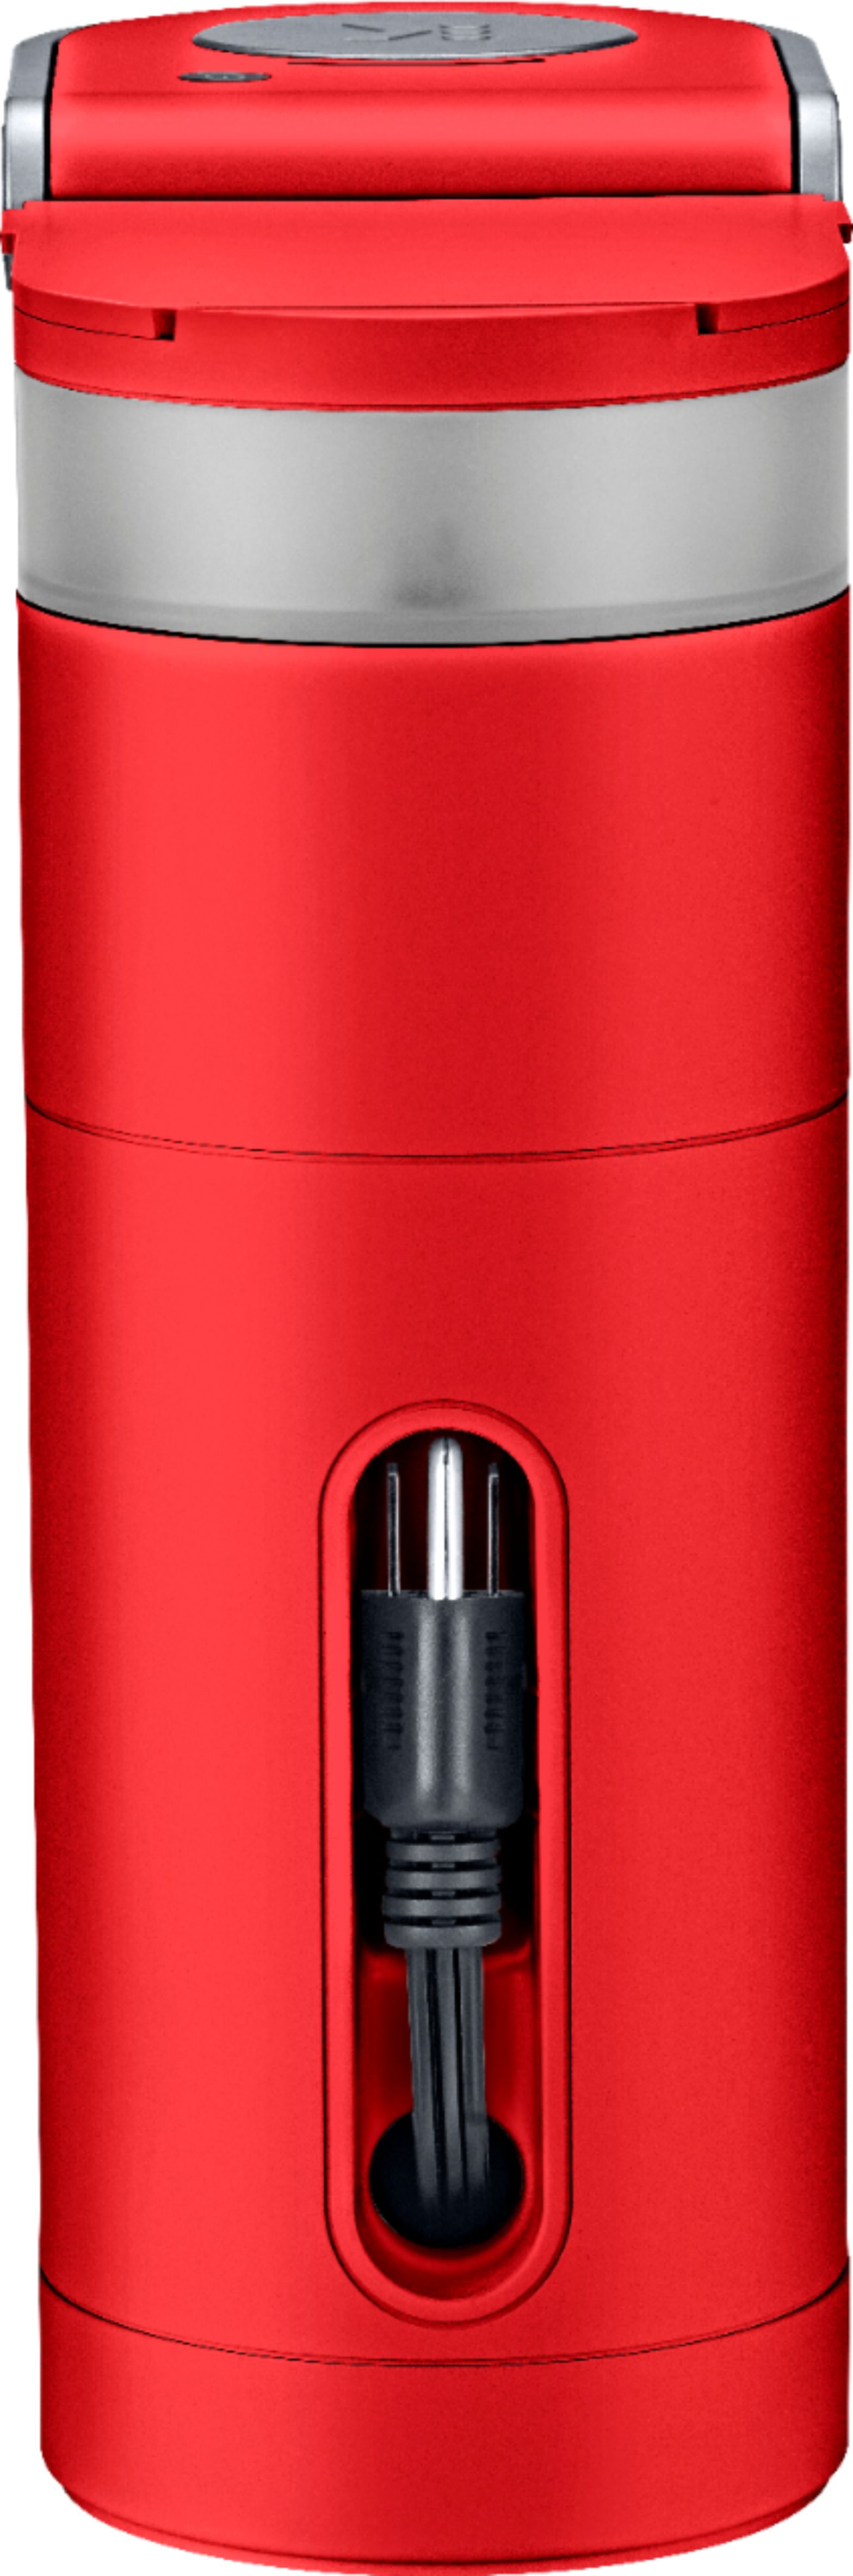 Keurig K-Mini Single Serve K-Cup Pod Coffee Maker, Poppy Red & Travel Mug  Fits K-Cup Pod Coffee Maker, 1 Count (Pack of 1), Stainless Steel